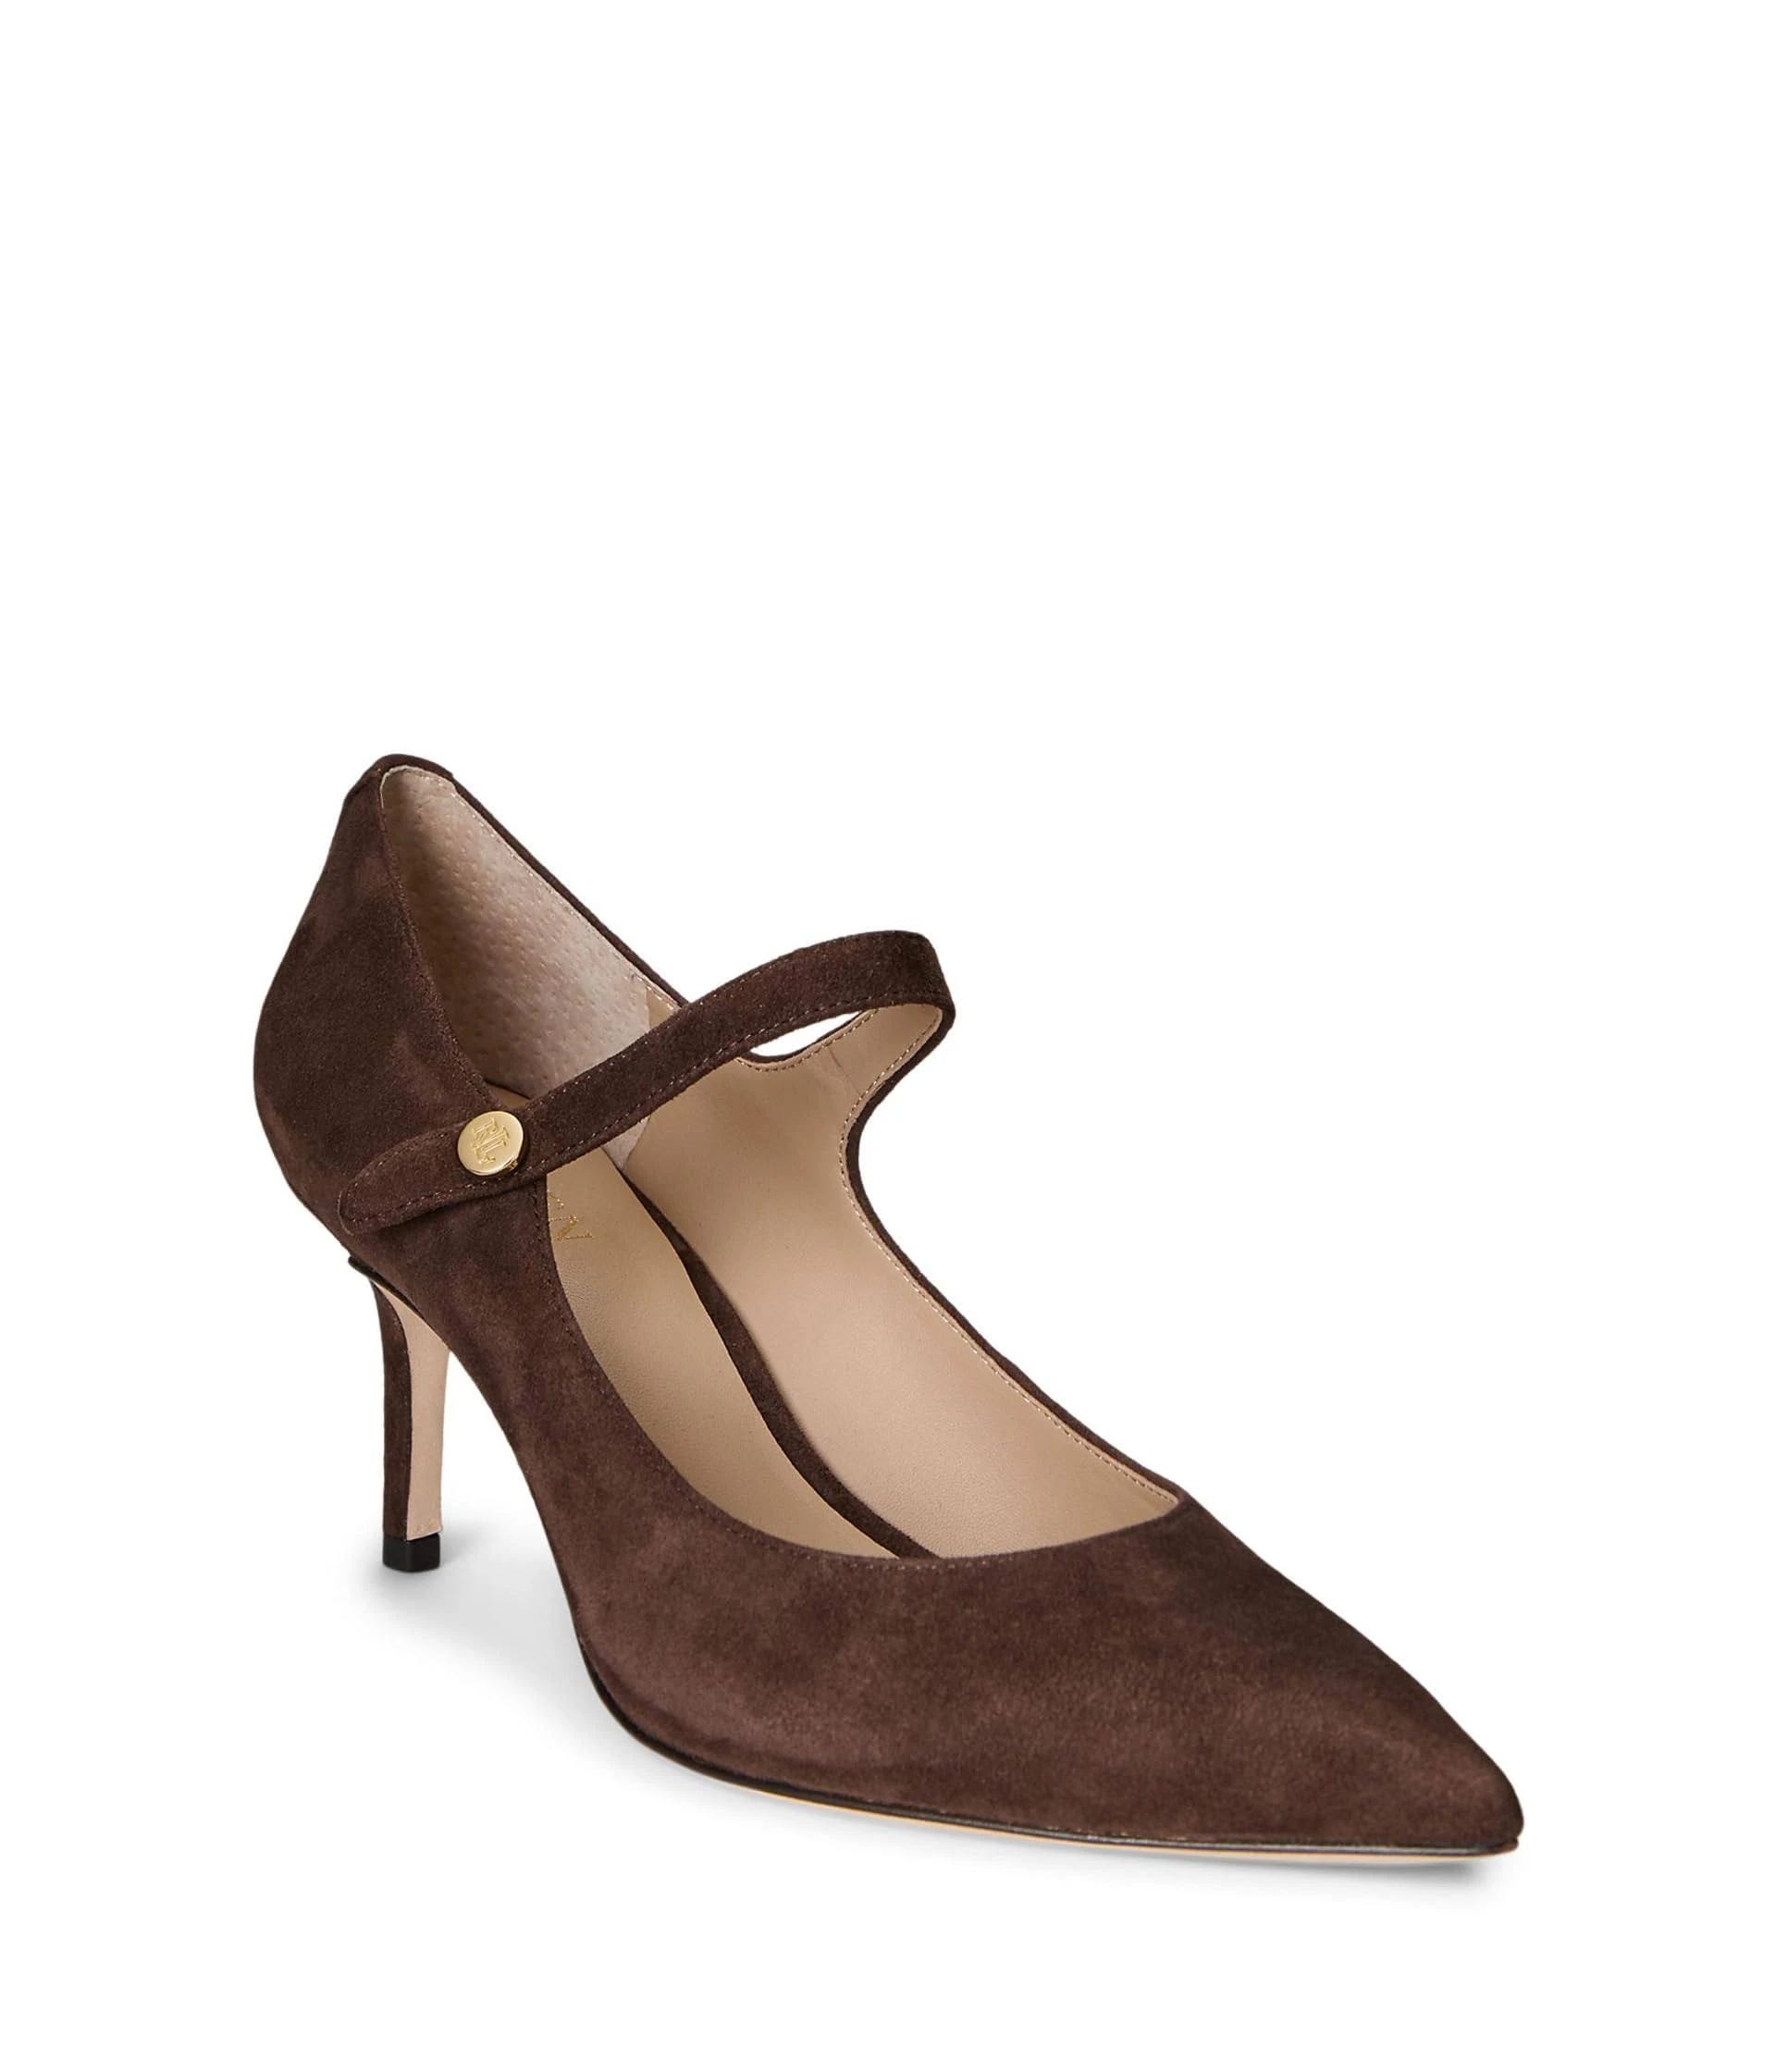 Comfortable Brown Pumps for Women - Leather Upper, Padded Insole, and Embellished Straps | Image